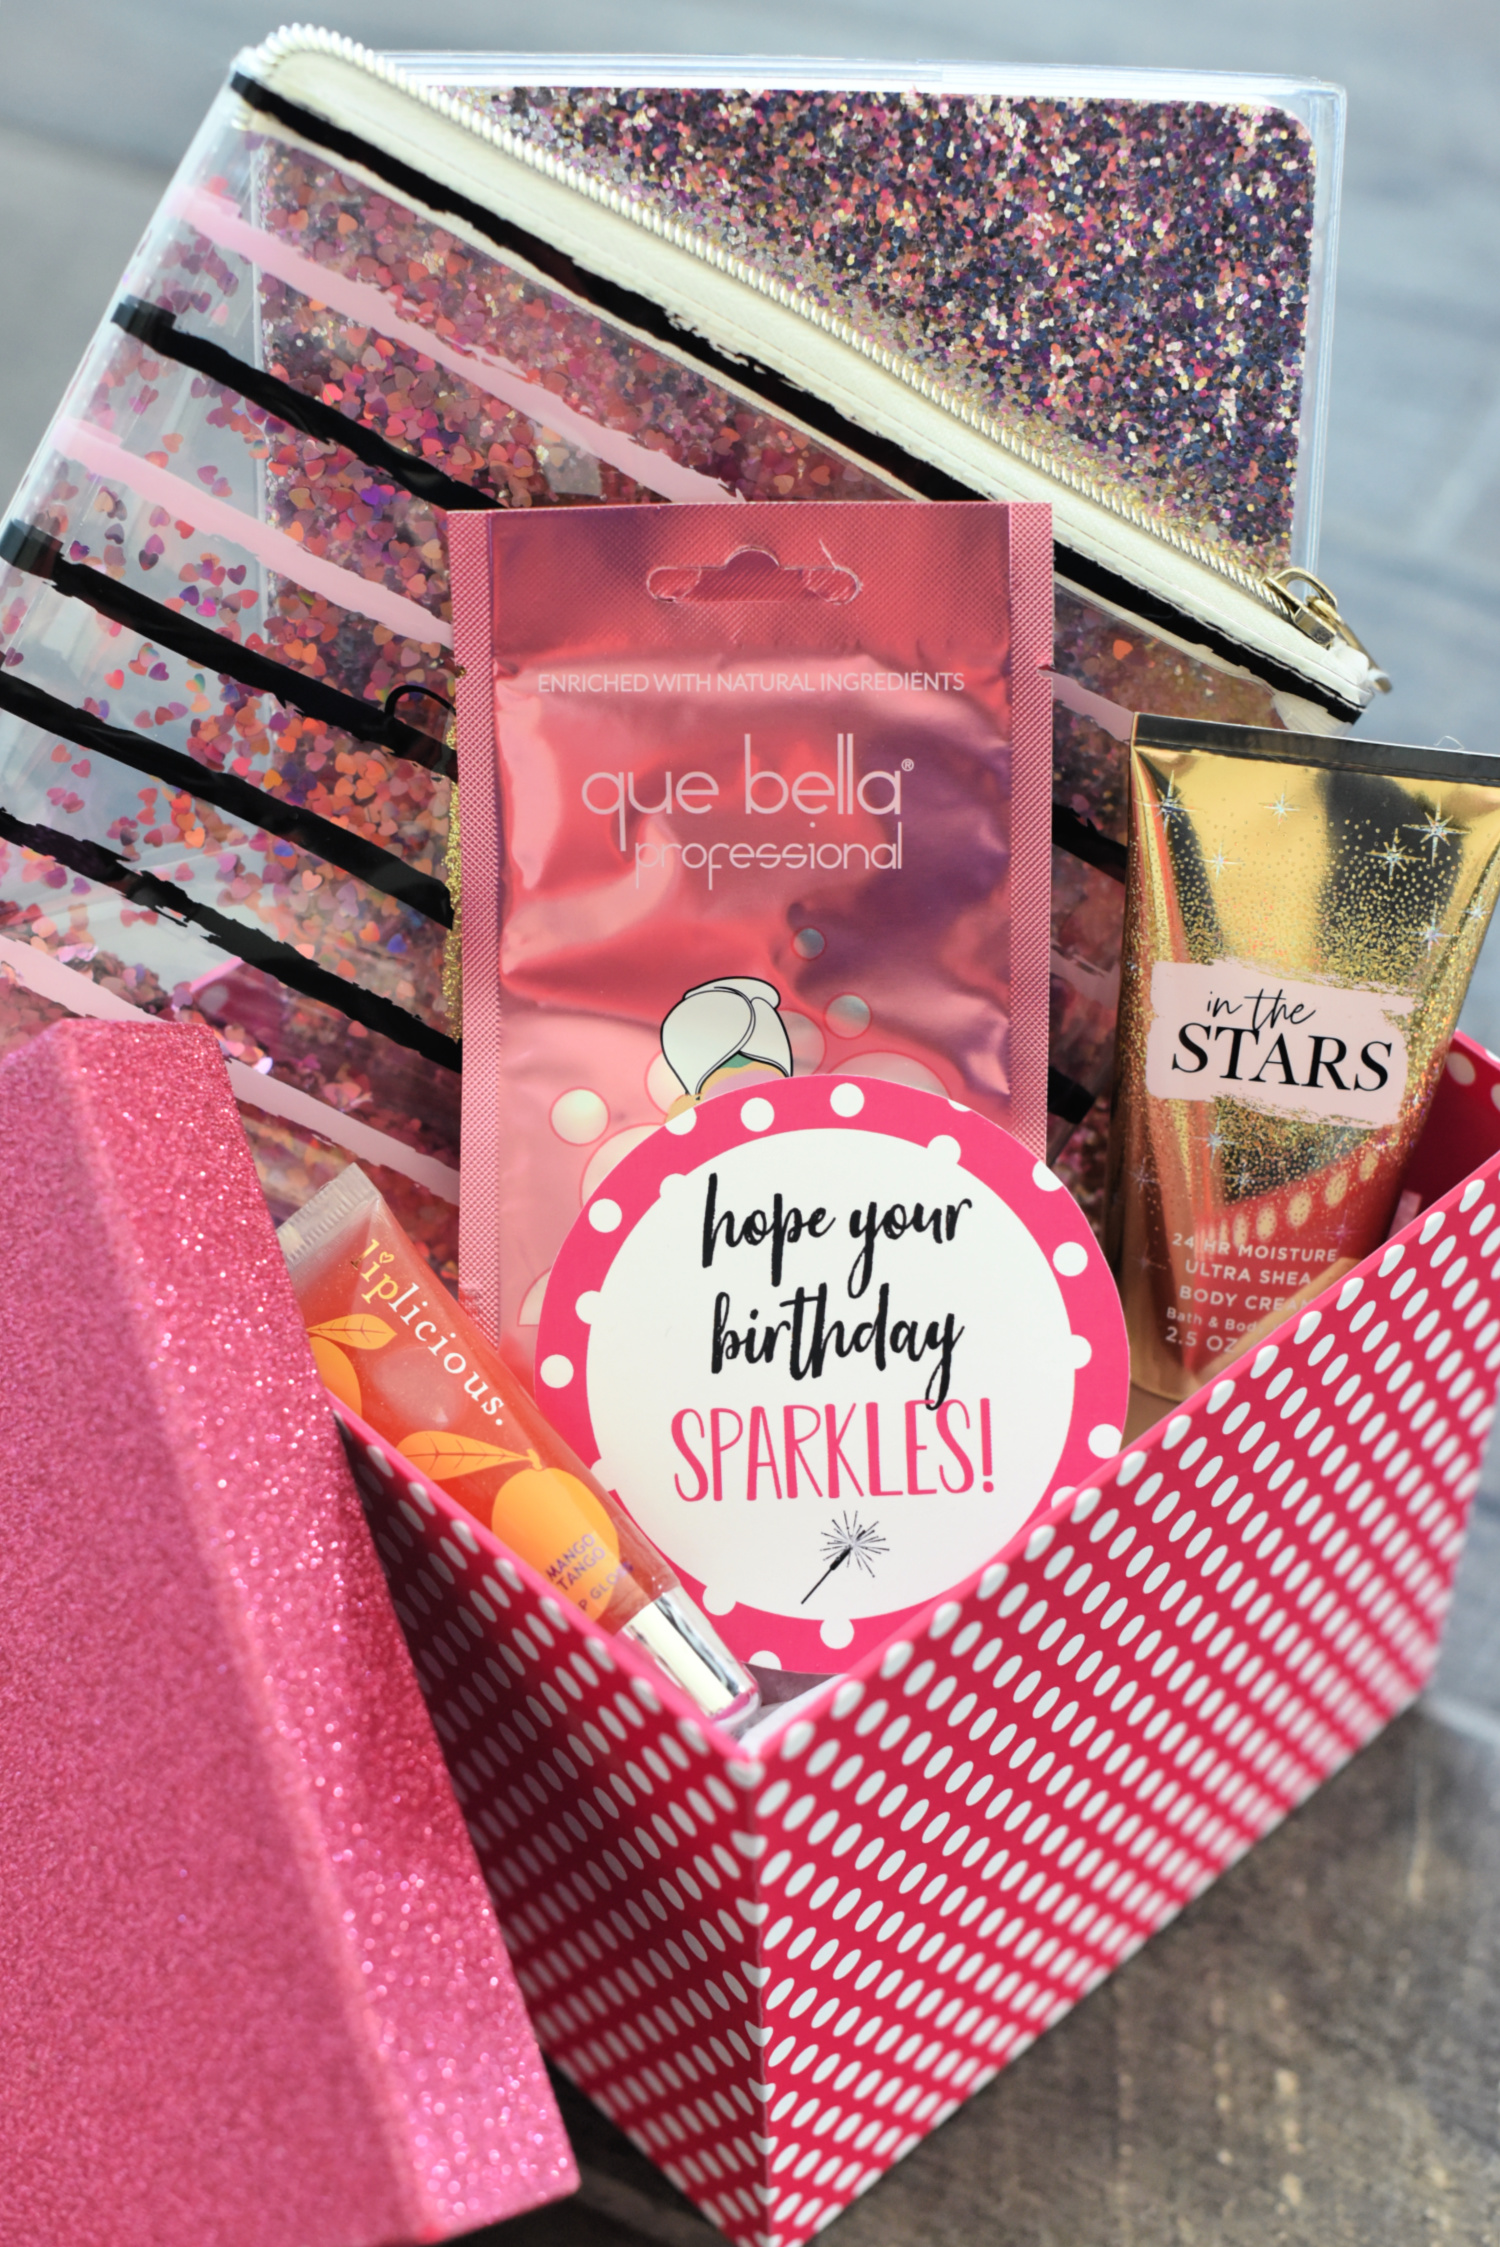 Glitter Gift for Friends-Got a friend who loves sparkle?! This cute gift basket is the perfect gift for her. Add all things that sparkle and this cute gift tag. #birthdaygift #giftideas #glitter #bestfriendgifts #gifts